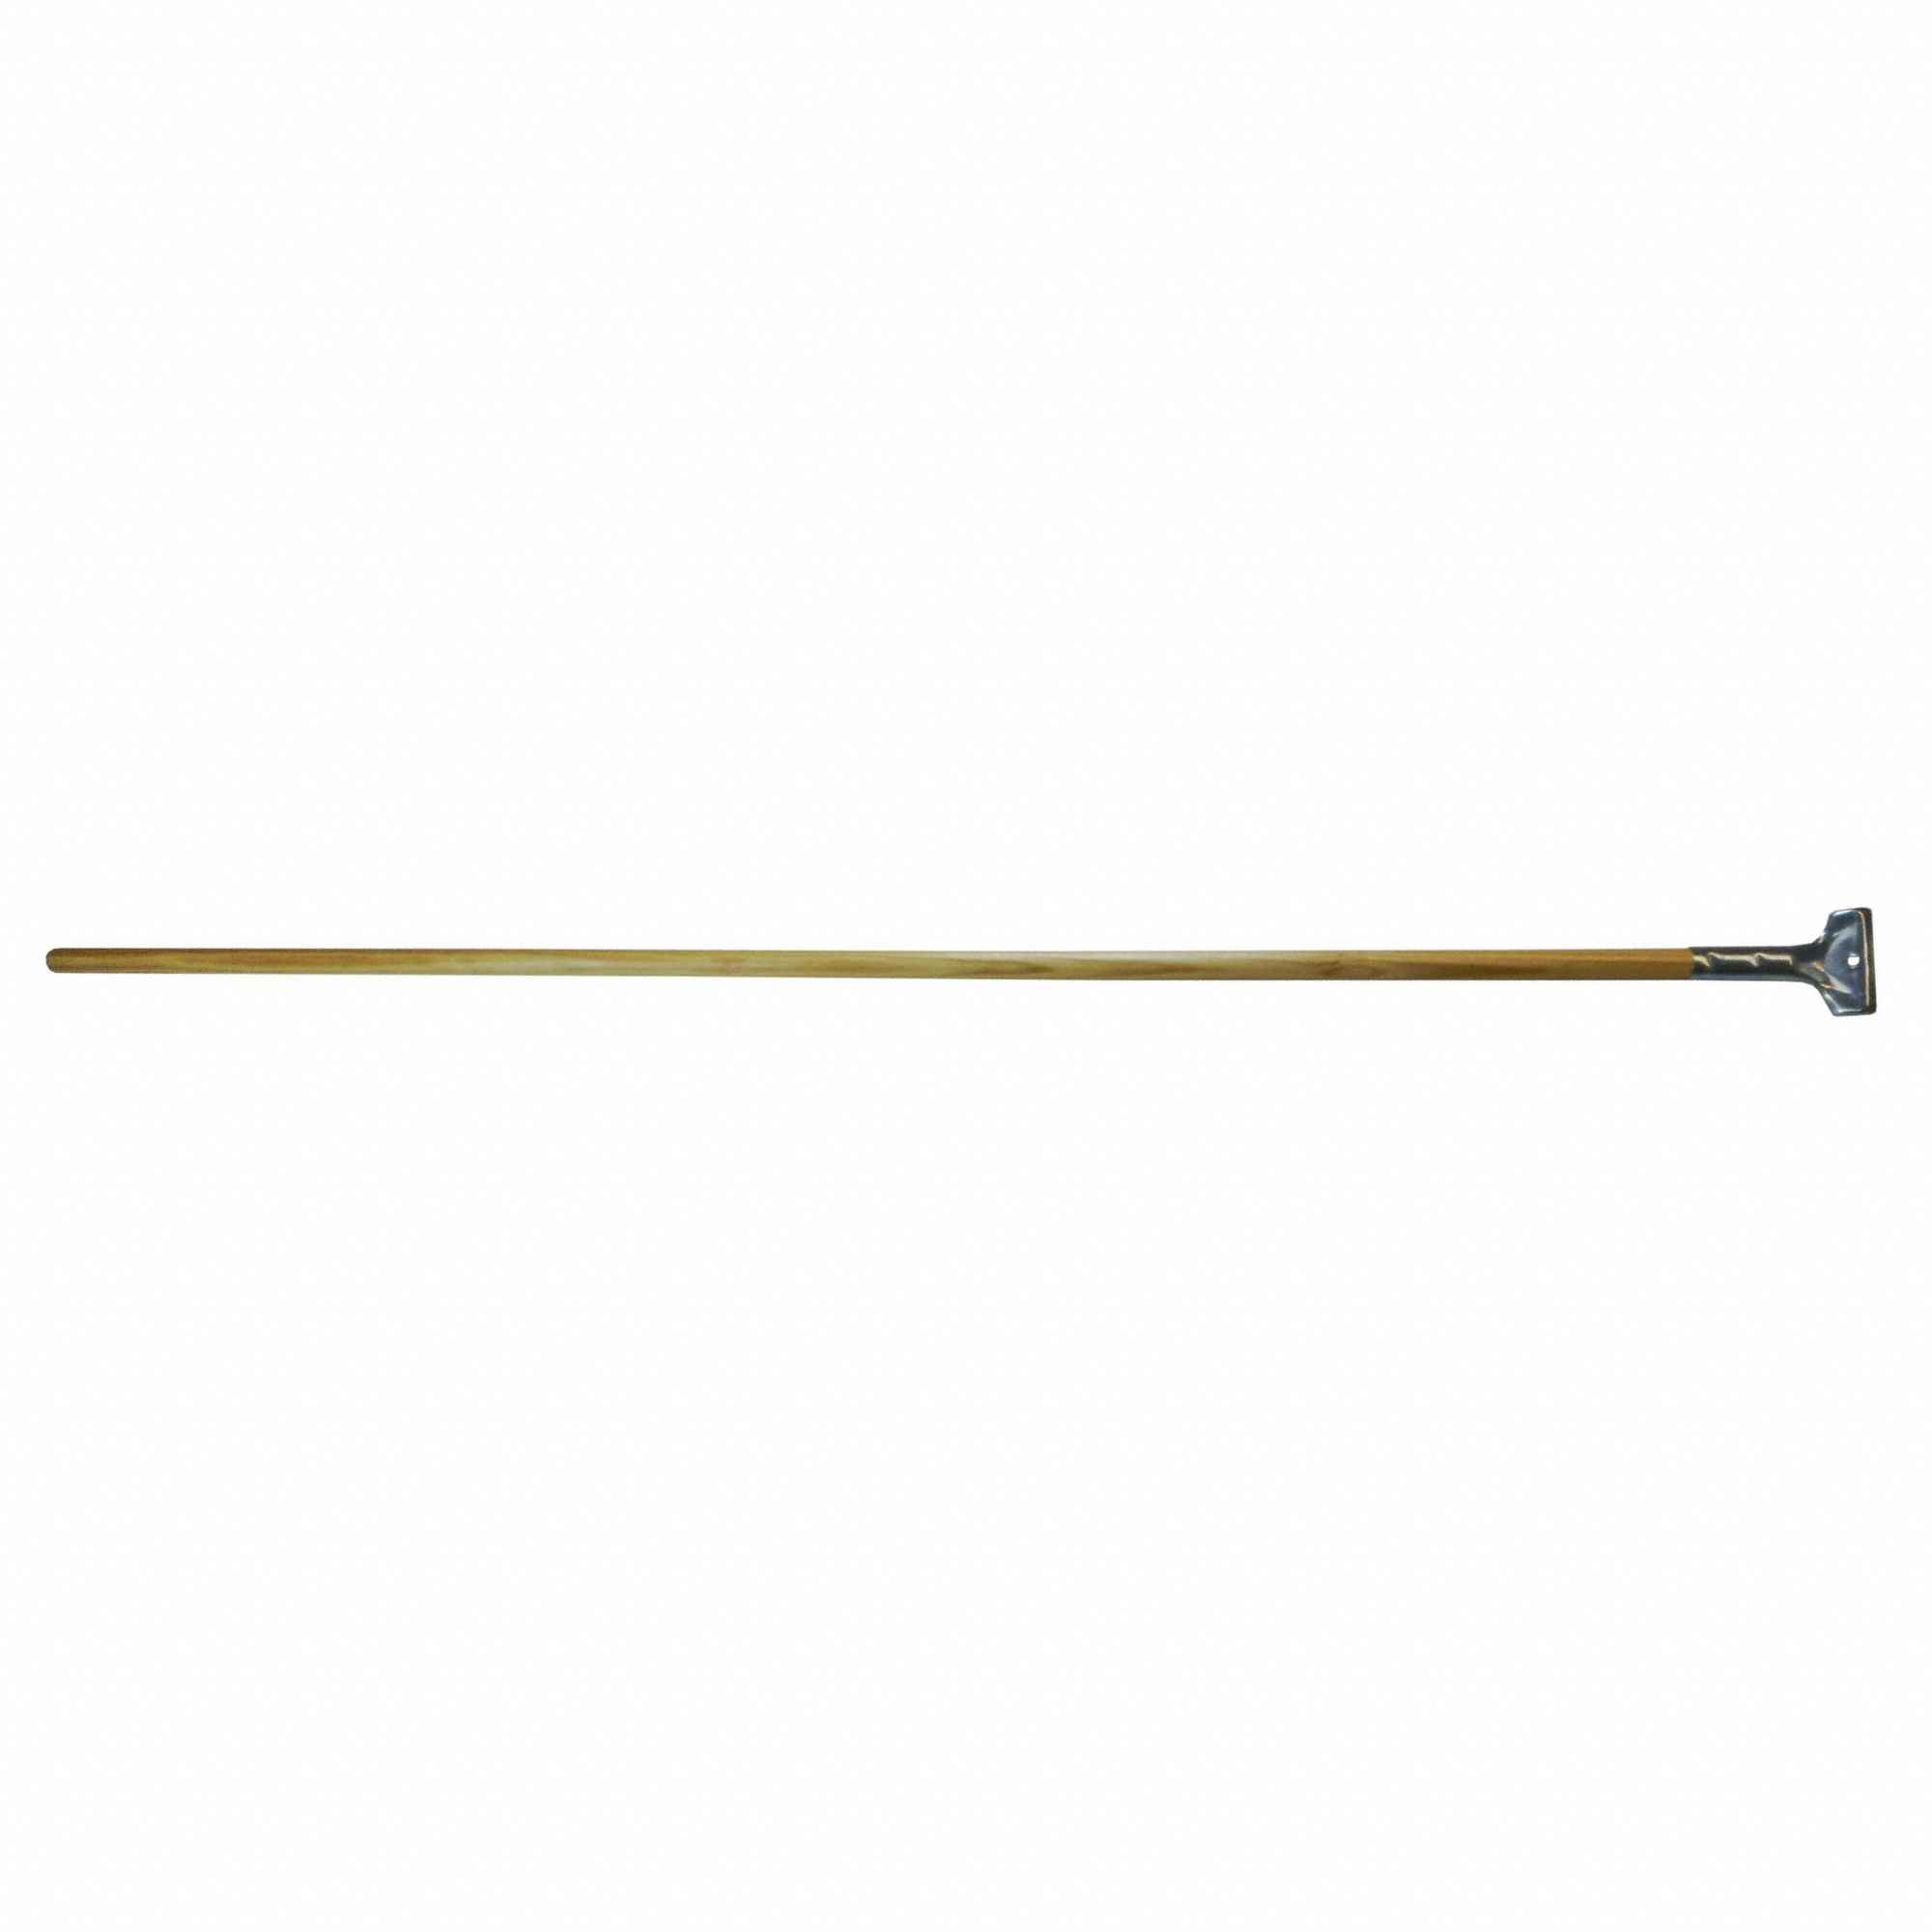 MICHIGAN BRUSH Handle: Bolt On, Wood, 60 in Lg, 1 in Dia, Wood, Fixed ...